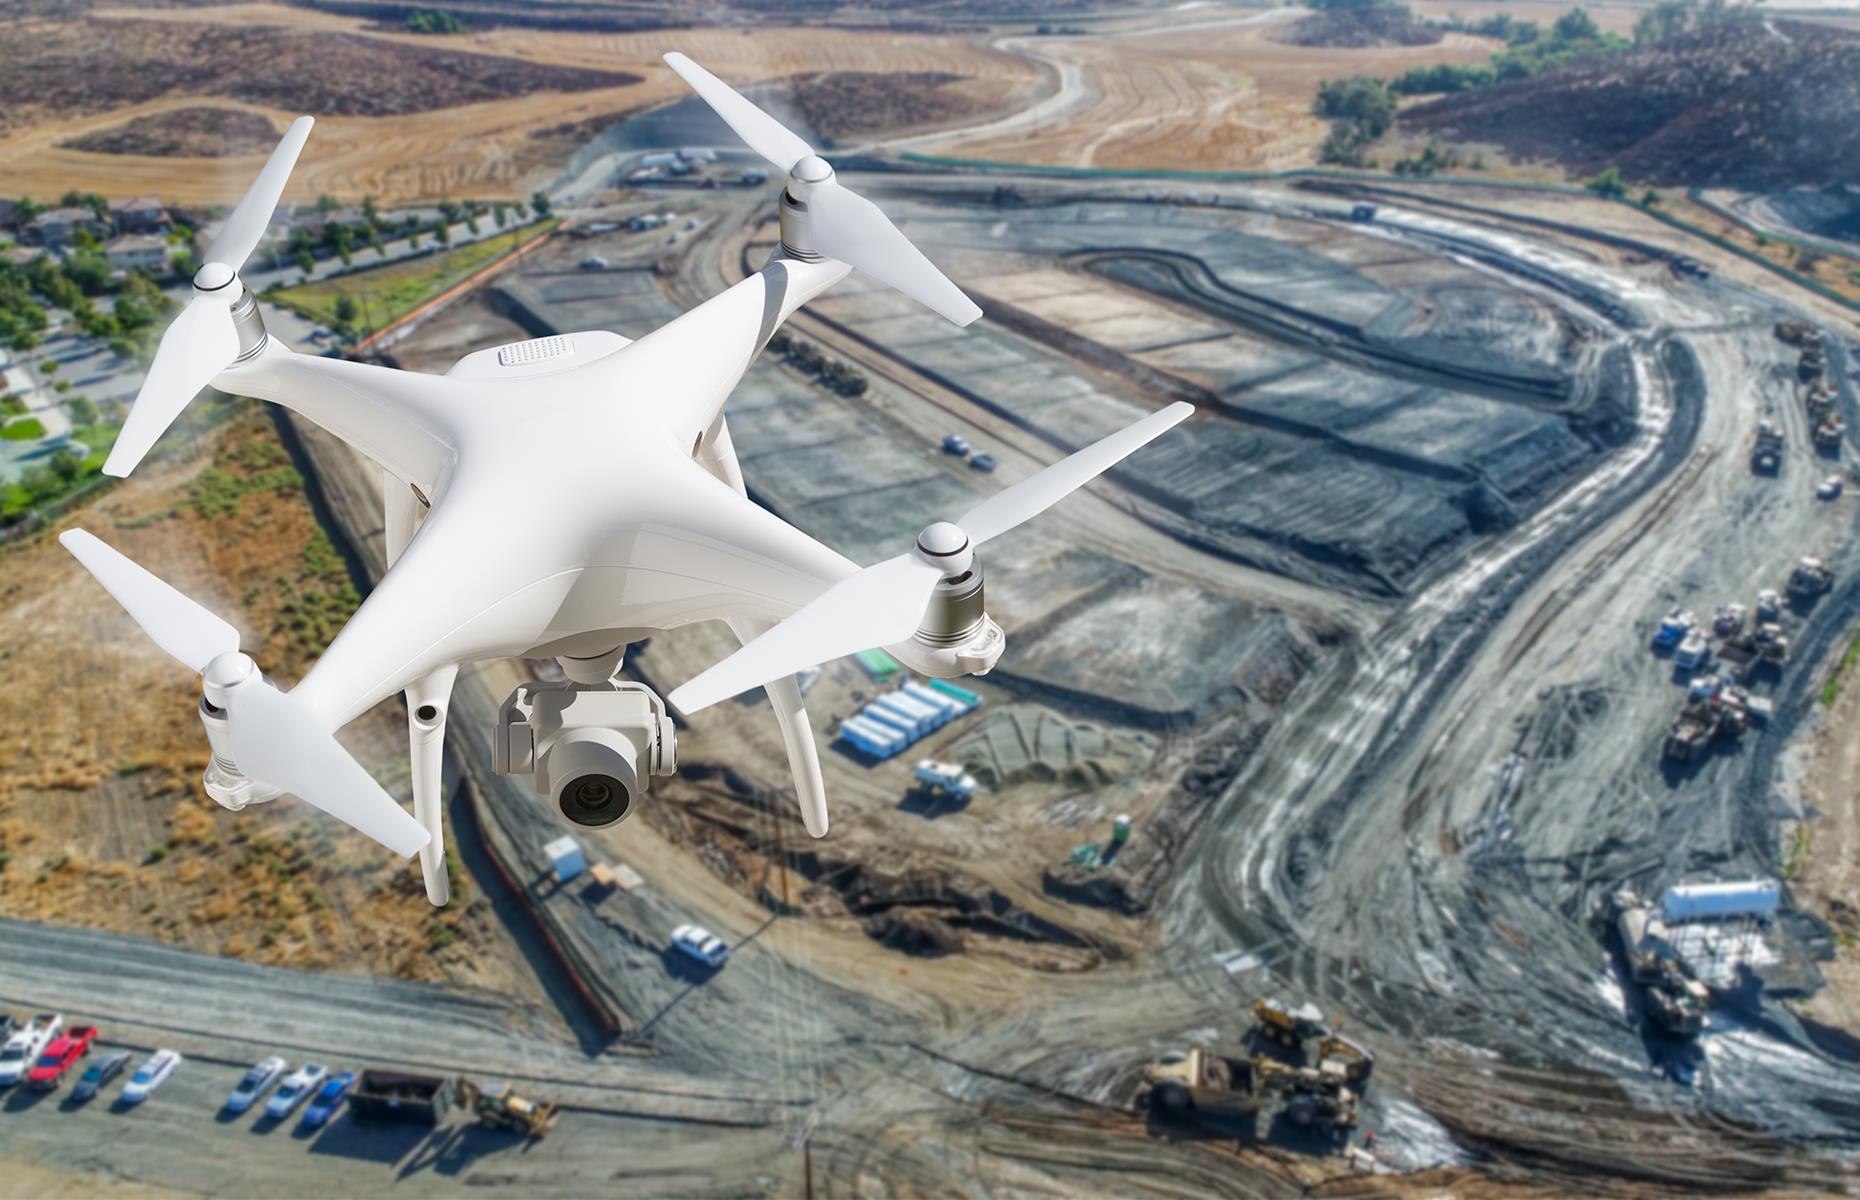 Drone duty: inspecting construction and infrastructure